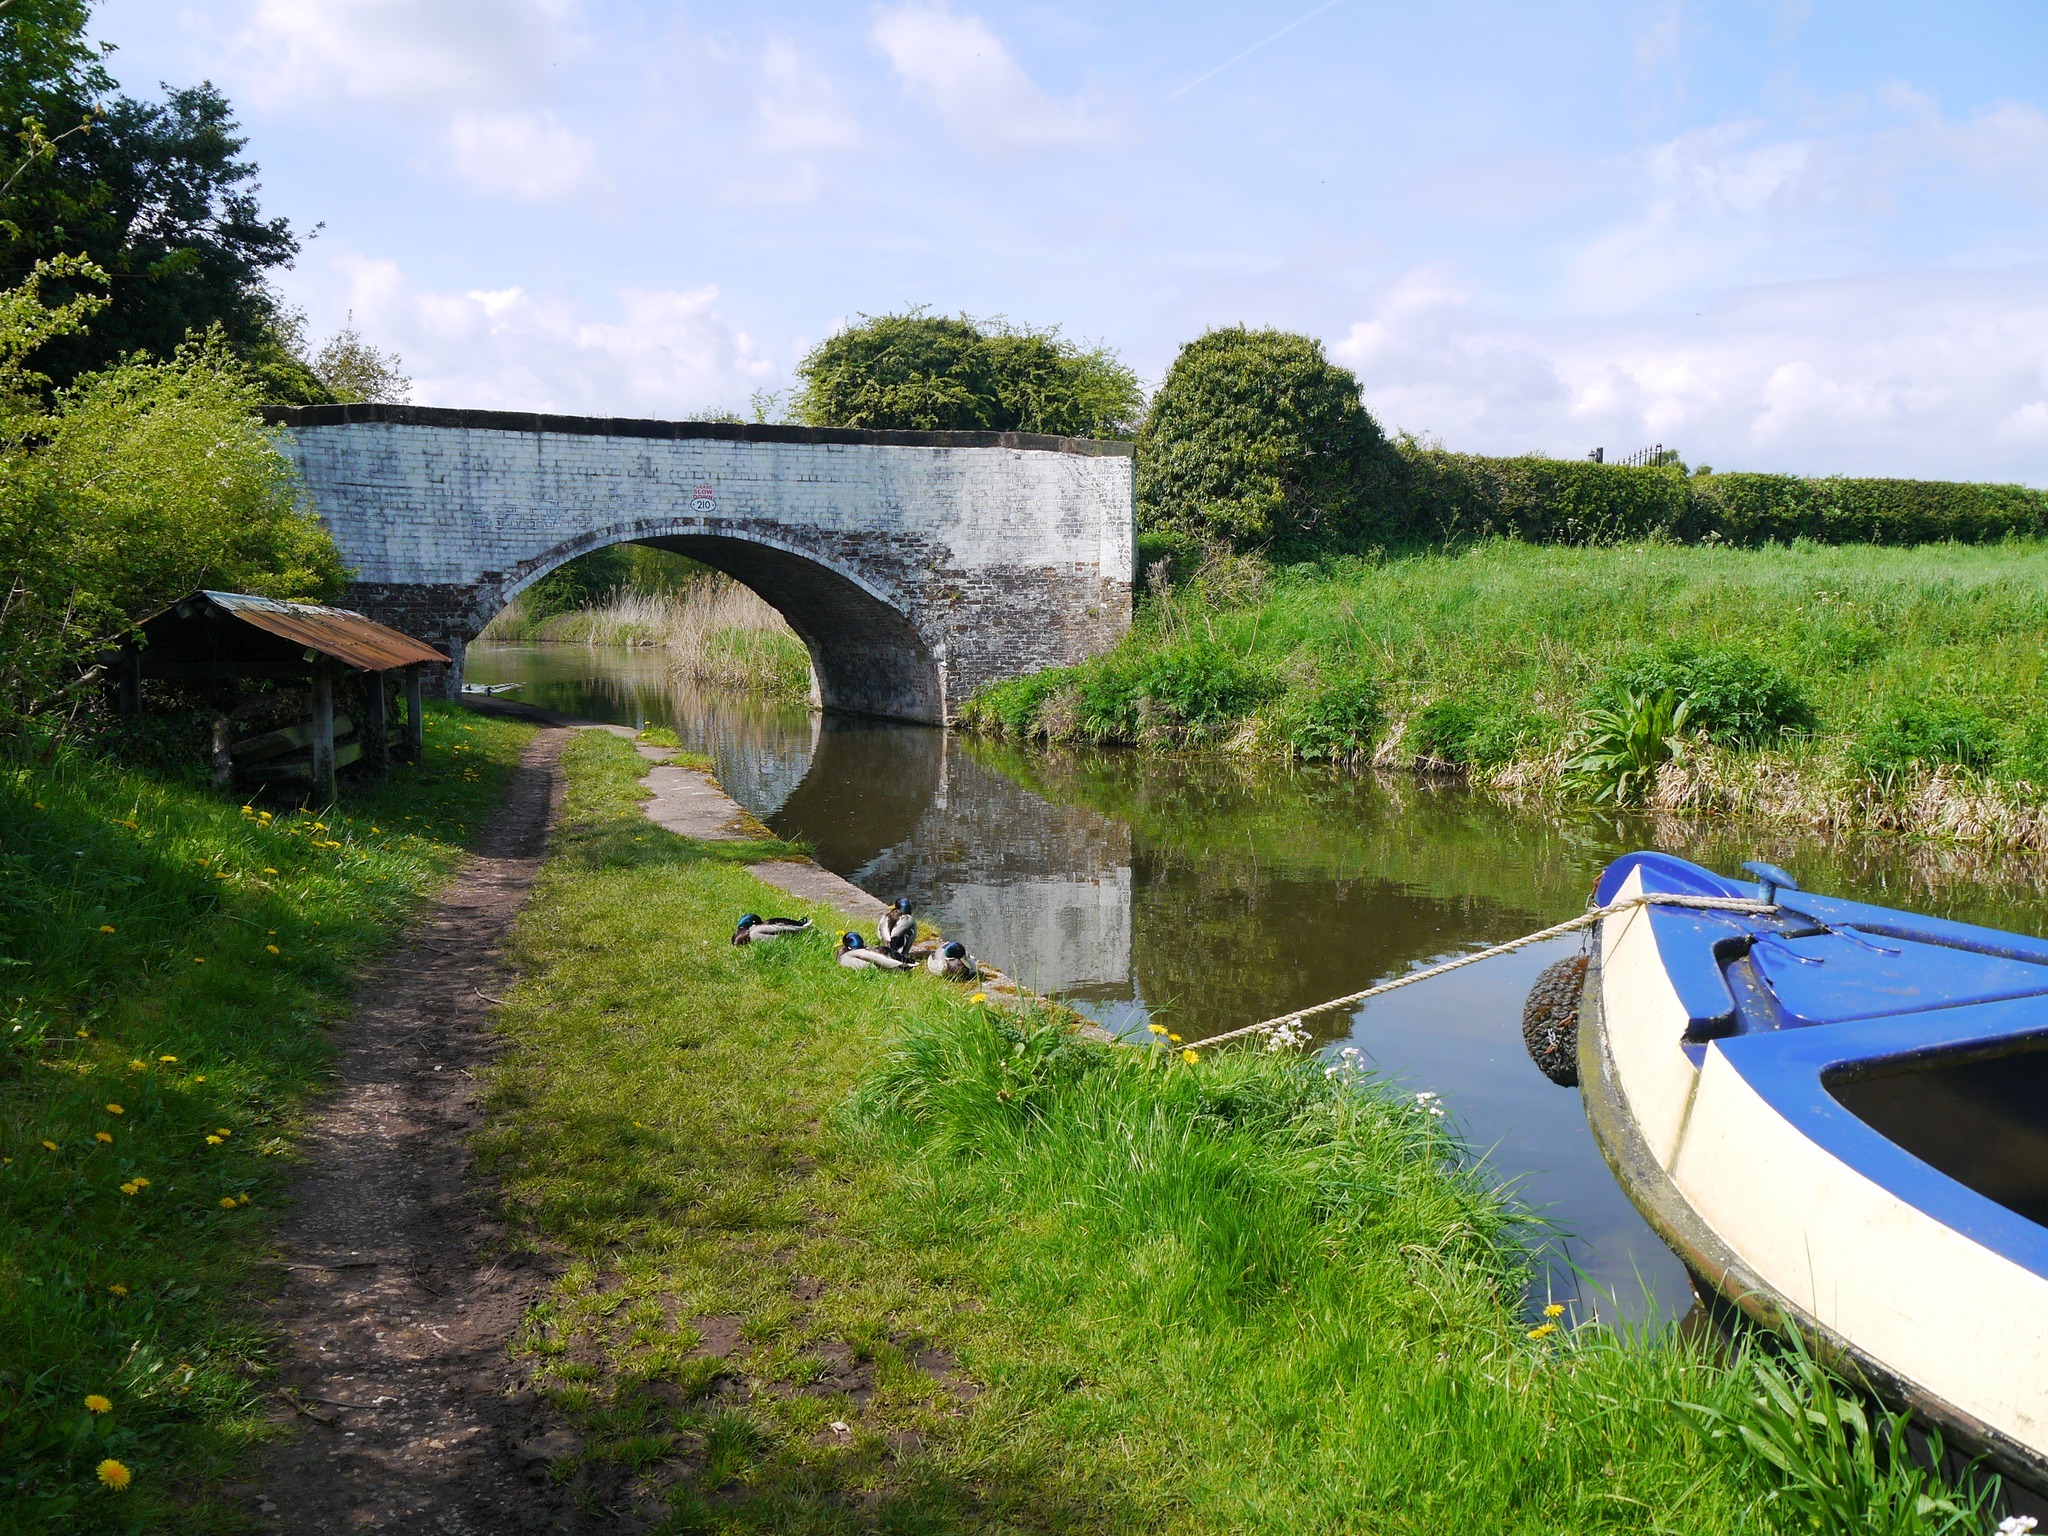 The Trent and Mersey Canal near Acton Bridge by Wendy Mahon